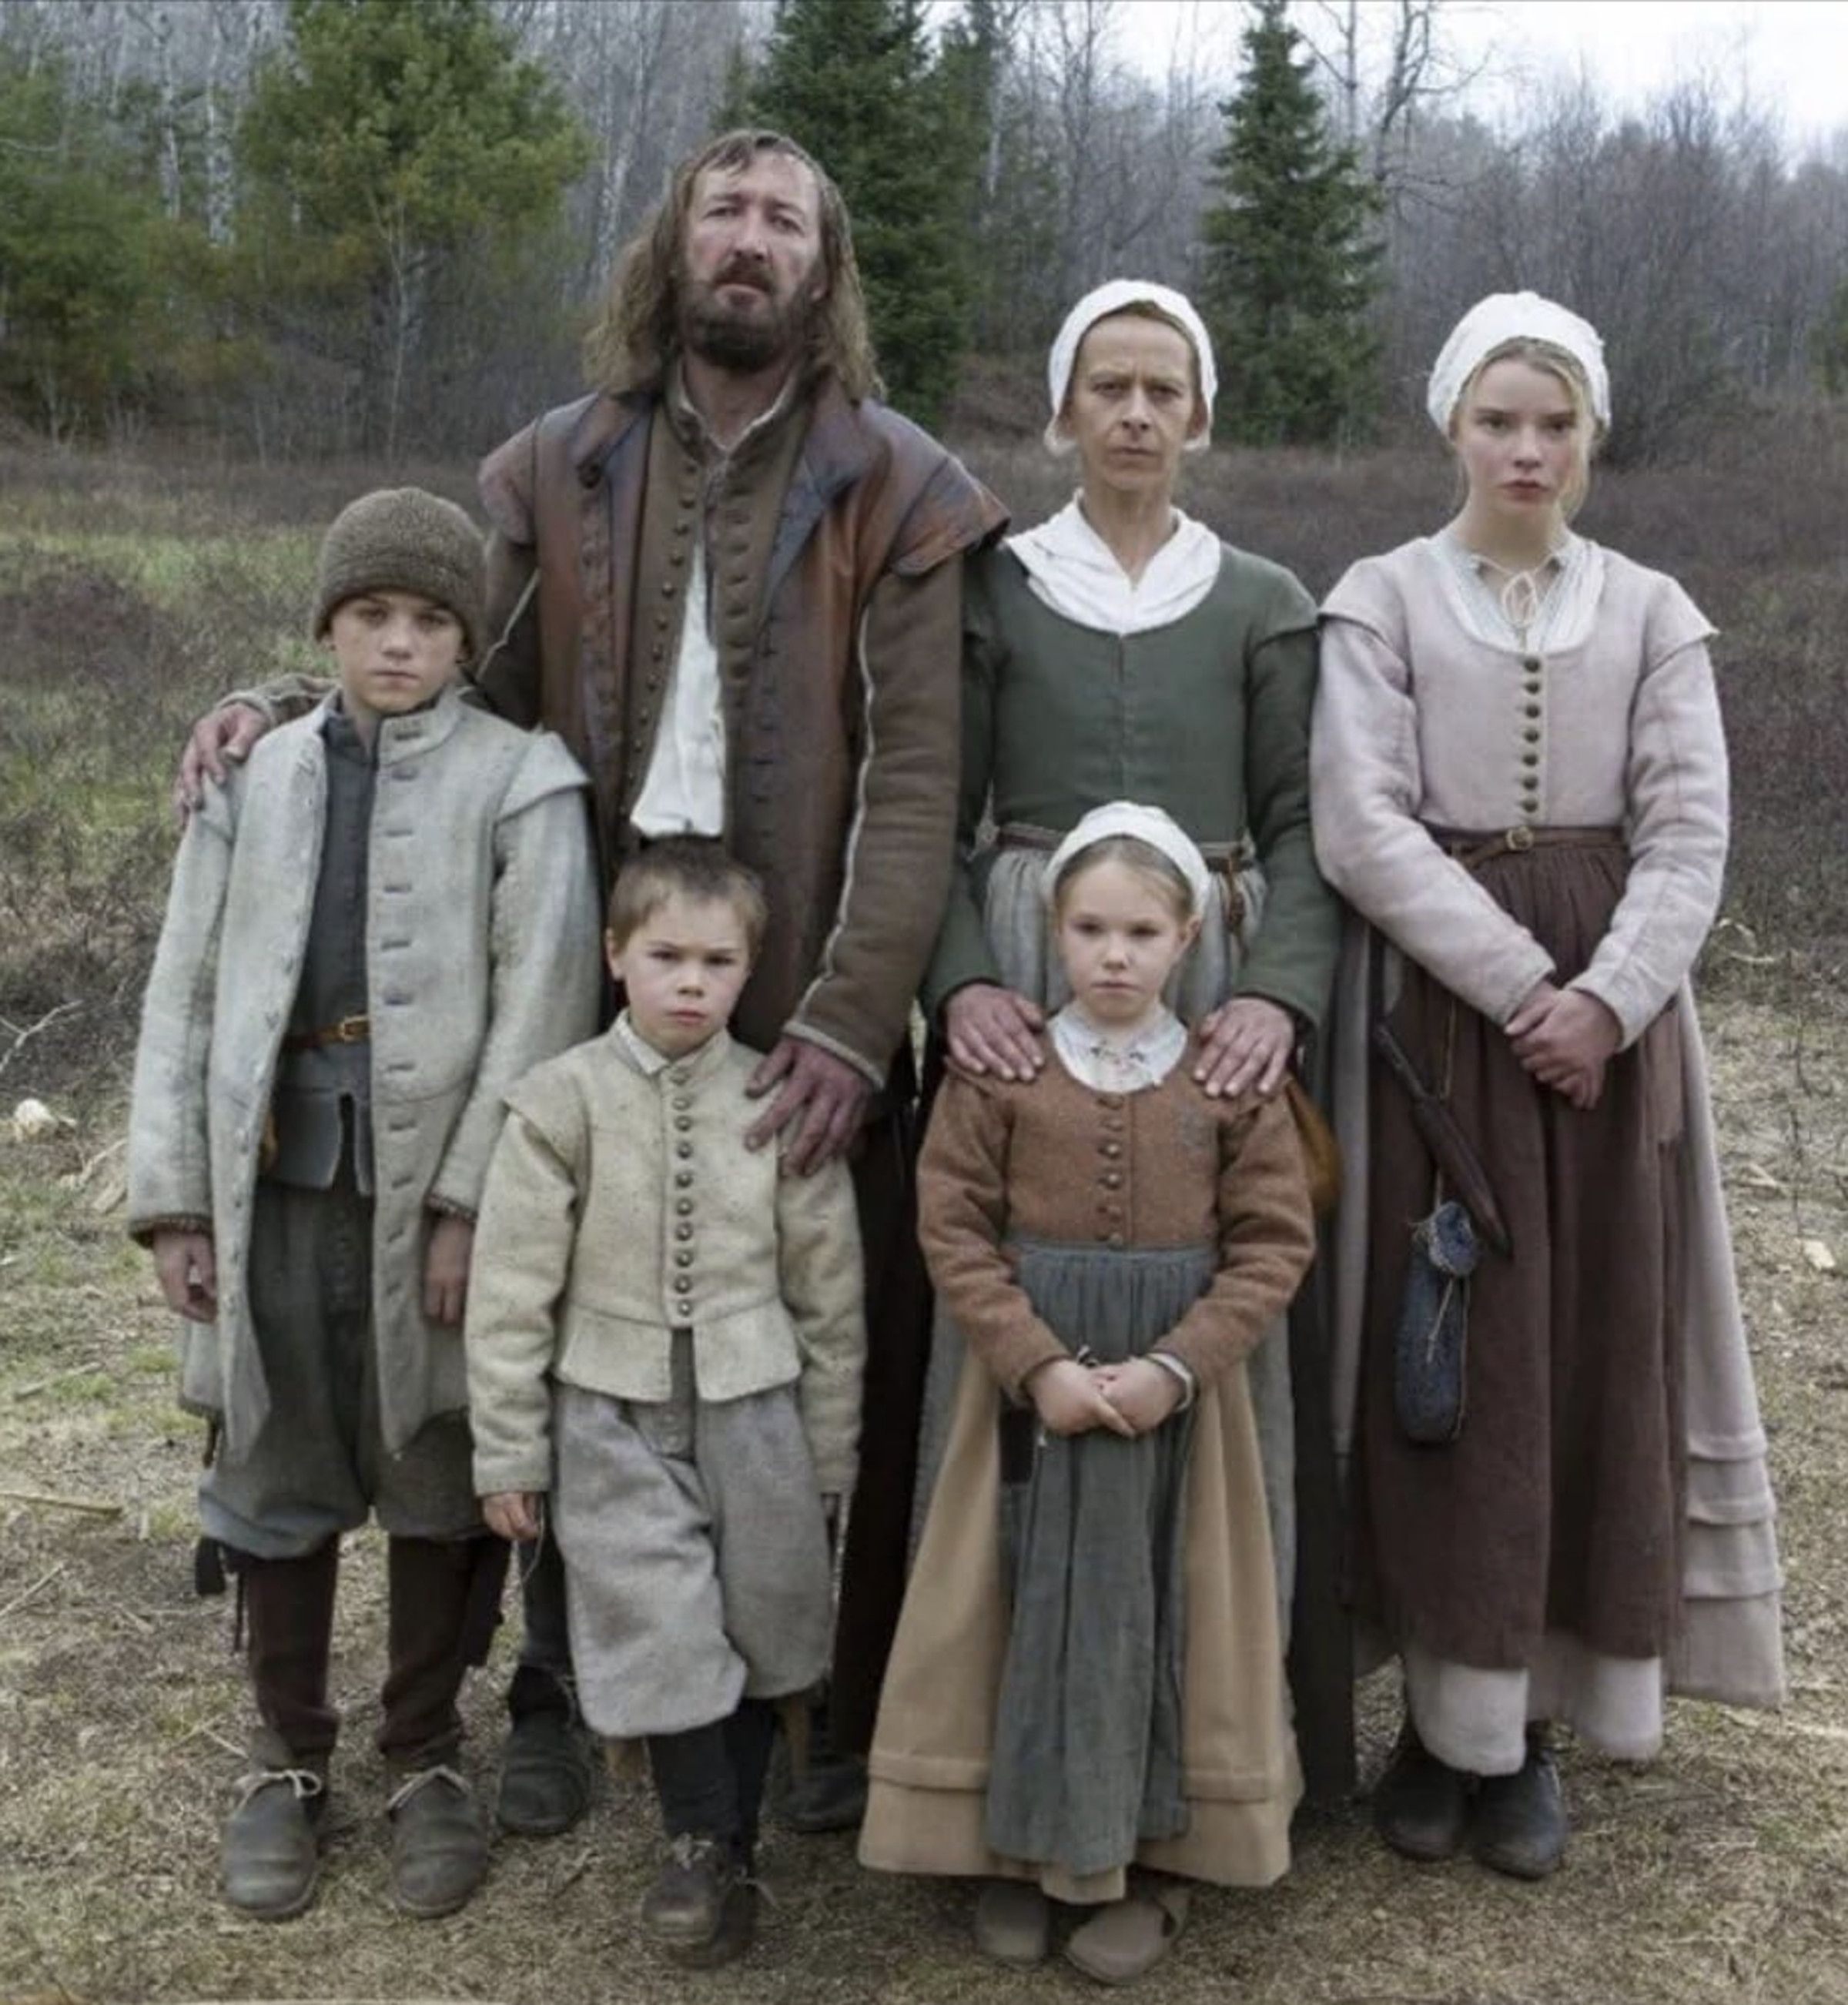 Screenshot from the 2015 film The Witch featuring a family of six Puritans.